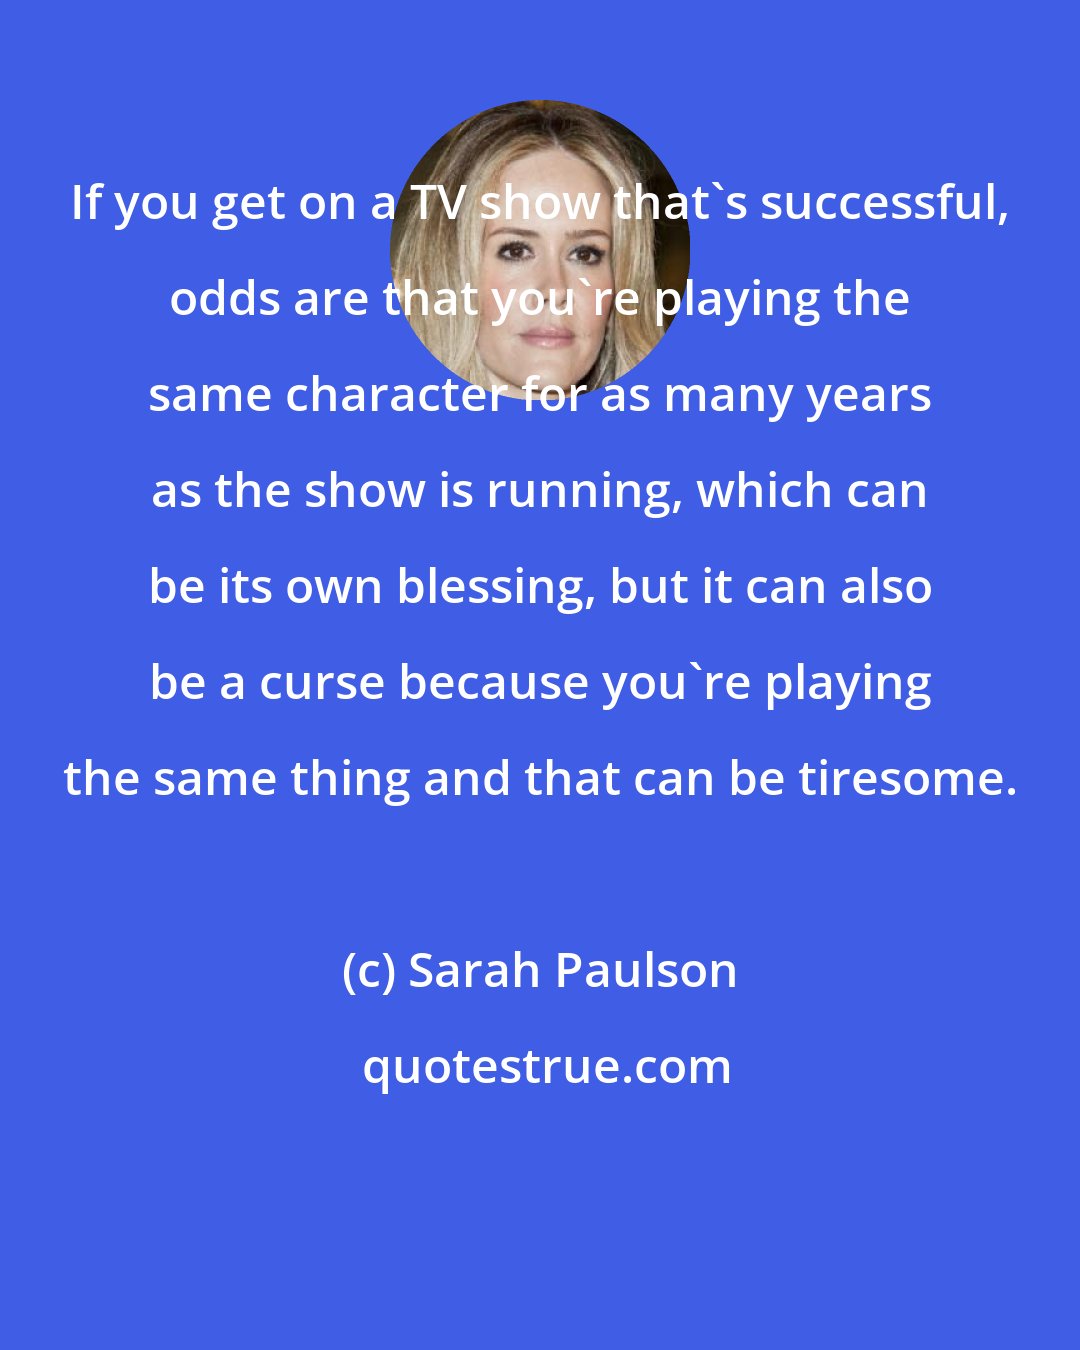 Sarah Paulson: If you get on a TV show that's successful, odds are that you're playing the same character for as many years as the show is running, which can be its own blessing, but it can also be a curse because you're playing the same thing and that can be tiresome.